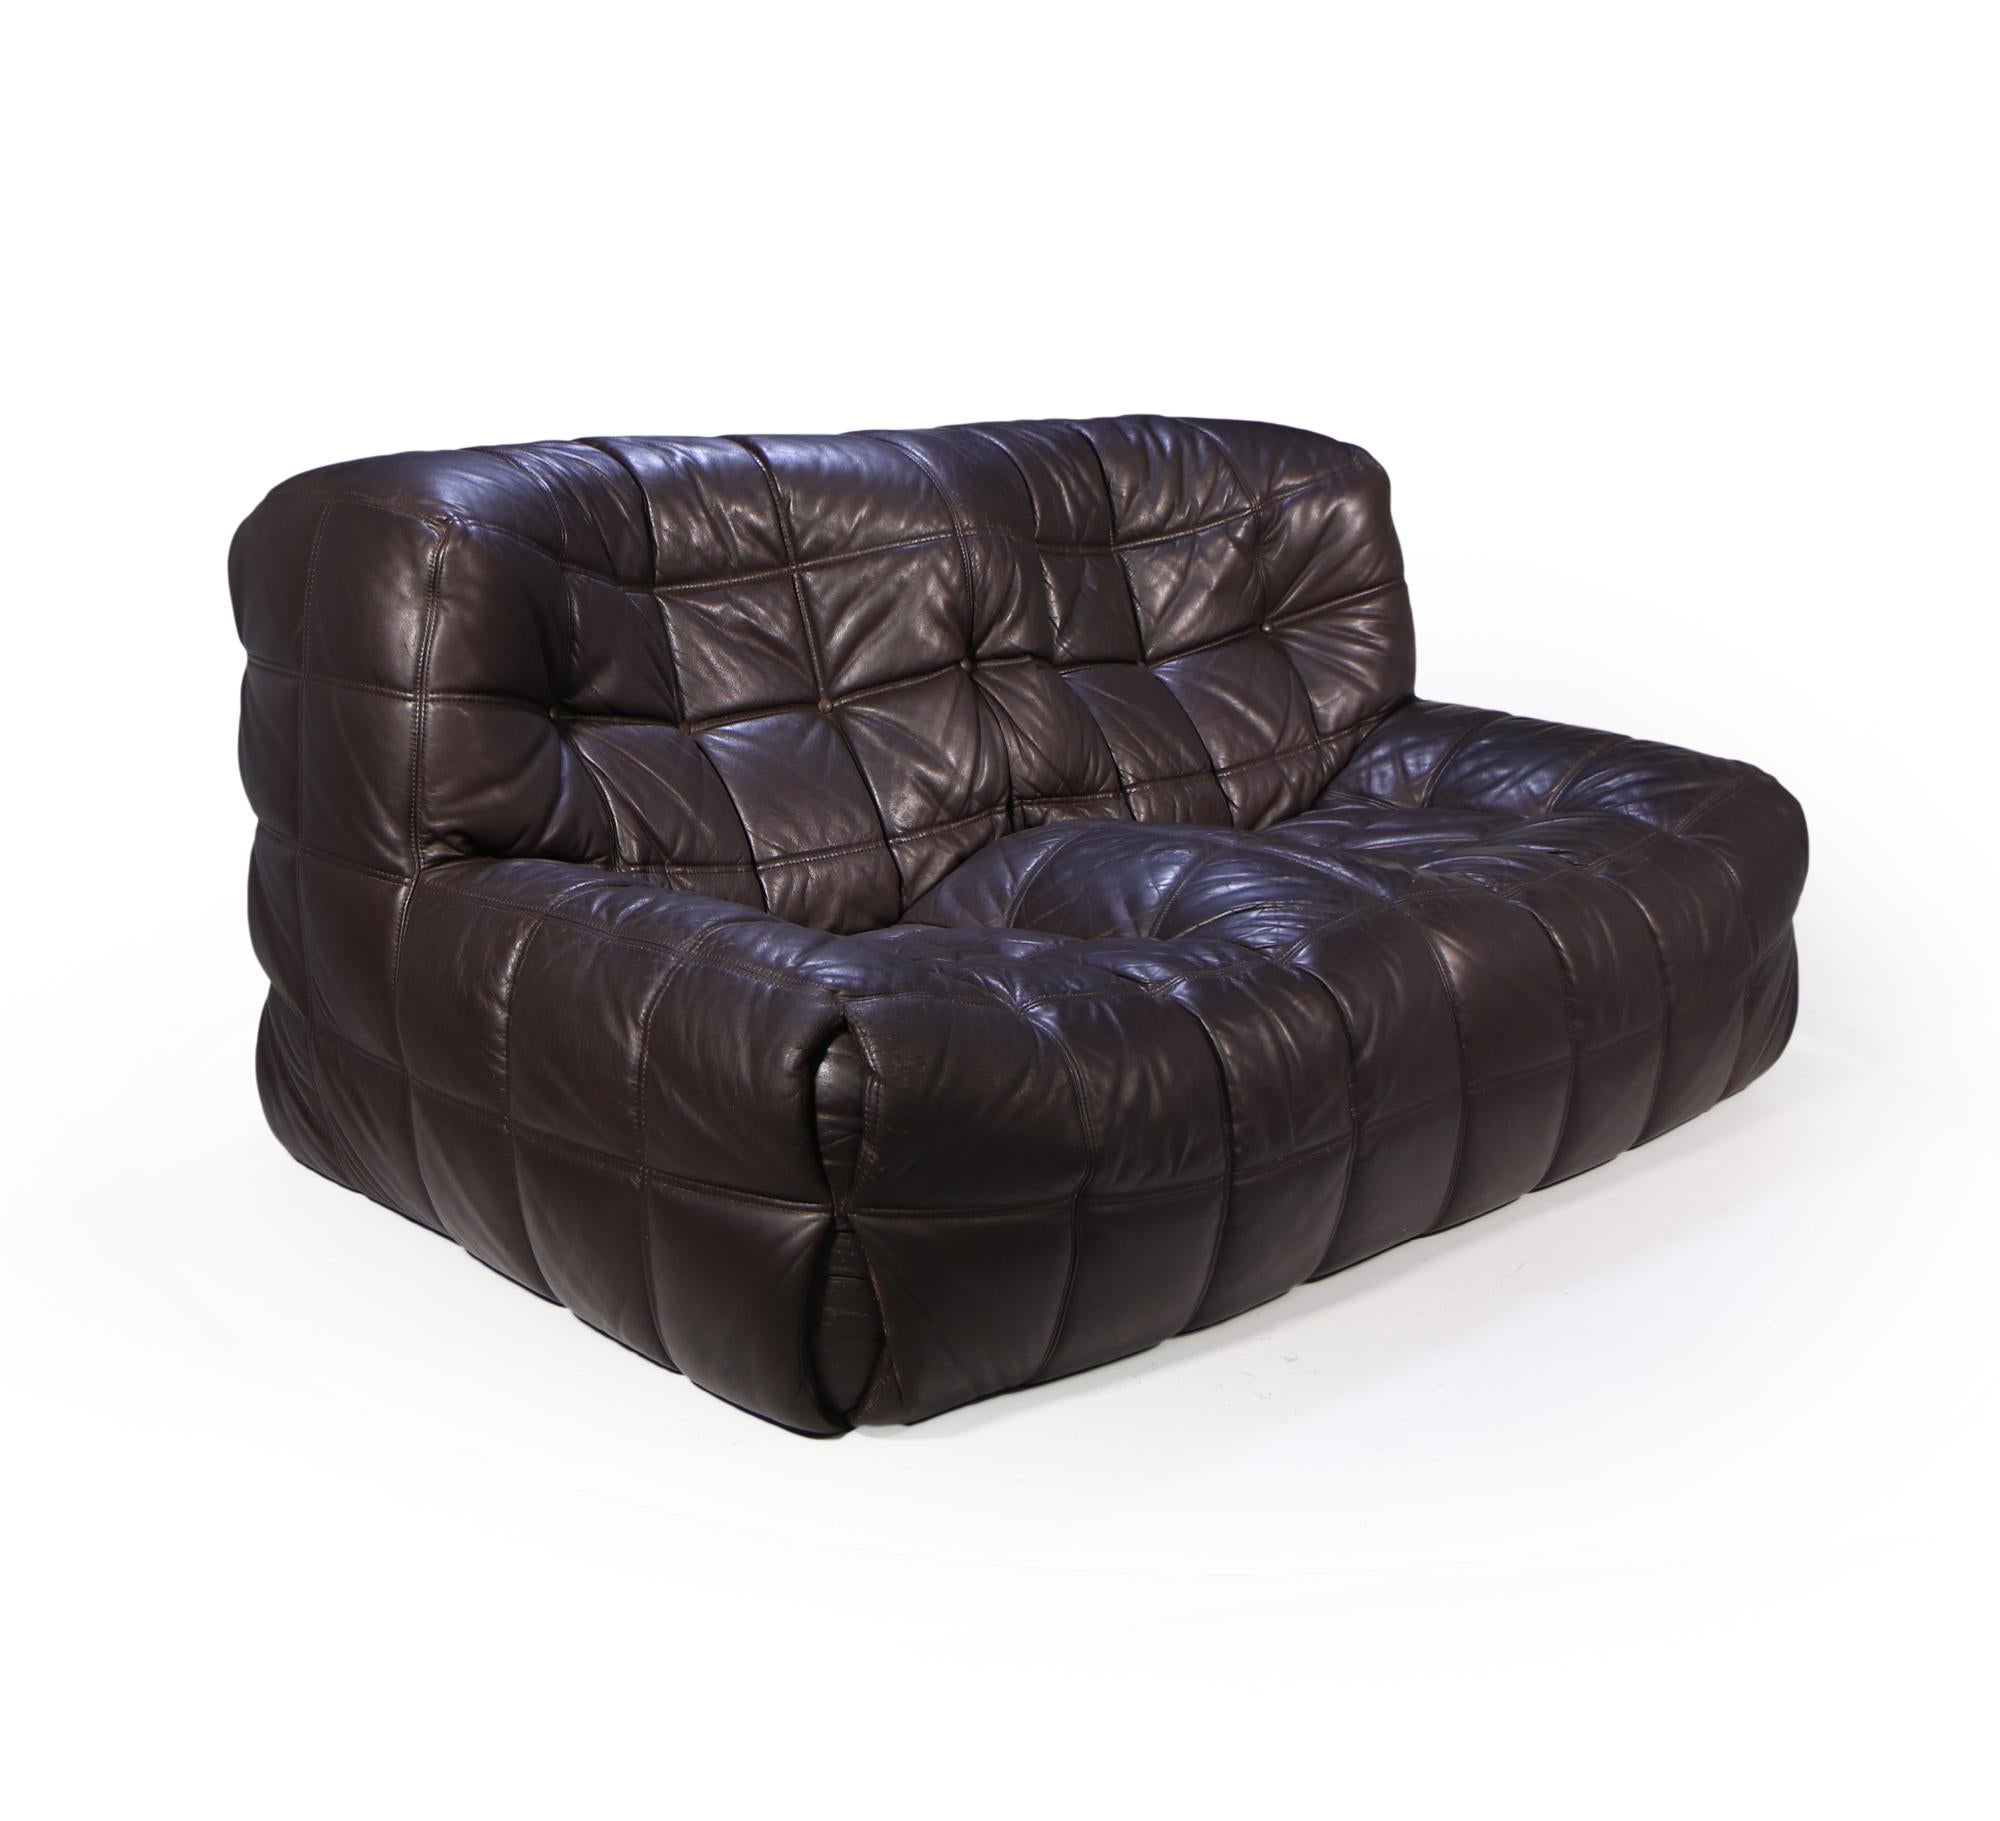 A two seat brown leather sofa Michel Ducaroy for Ligne Roset the Kashima is understated but outstanding design and comfortable, the sofa is low to the ground with moulded seats using different levels of foam leaving two shaped seating areas. This